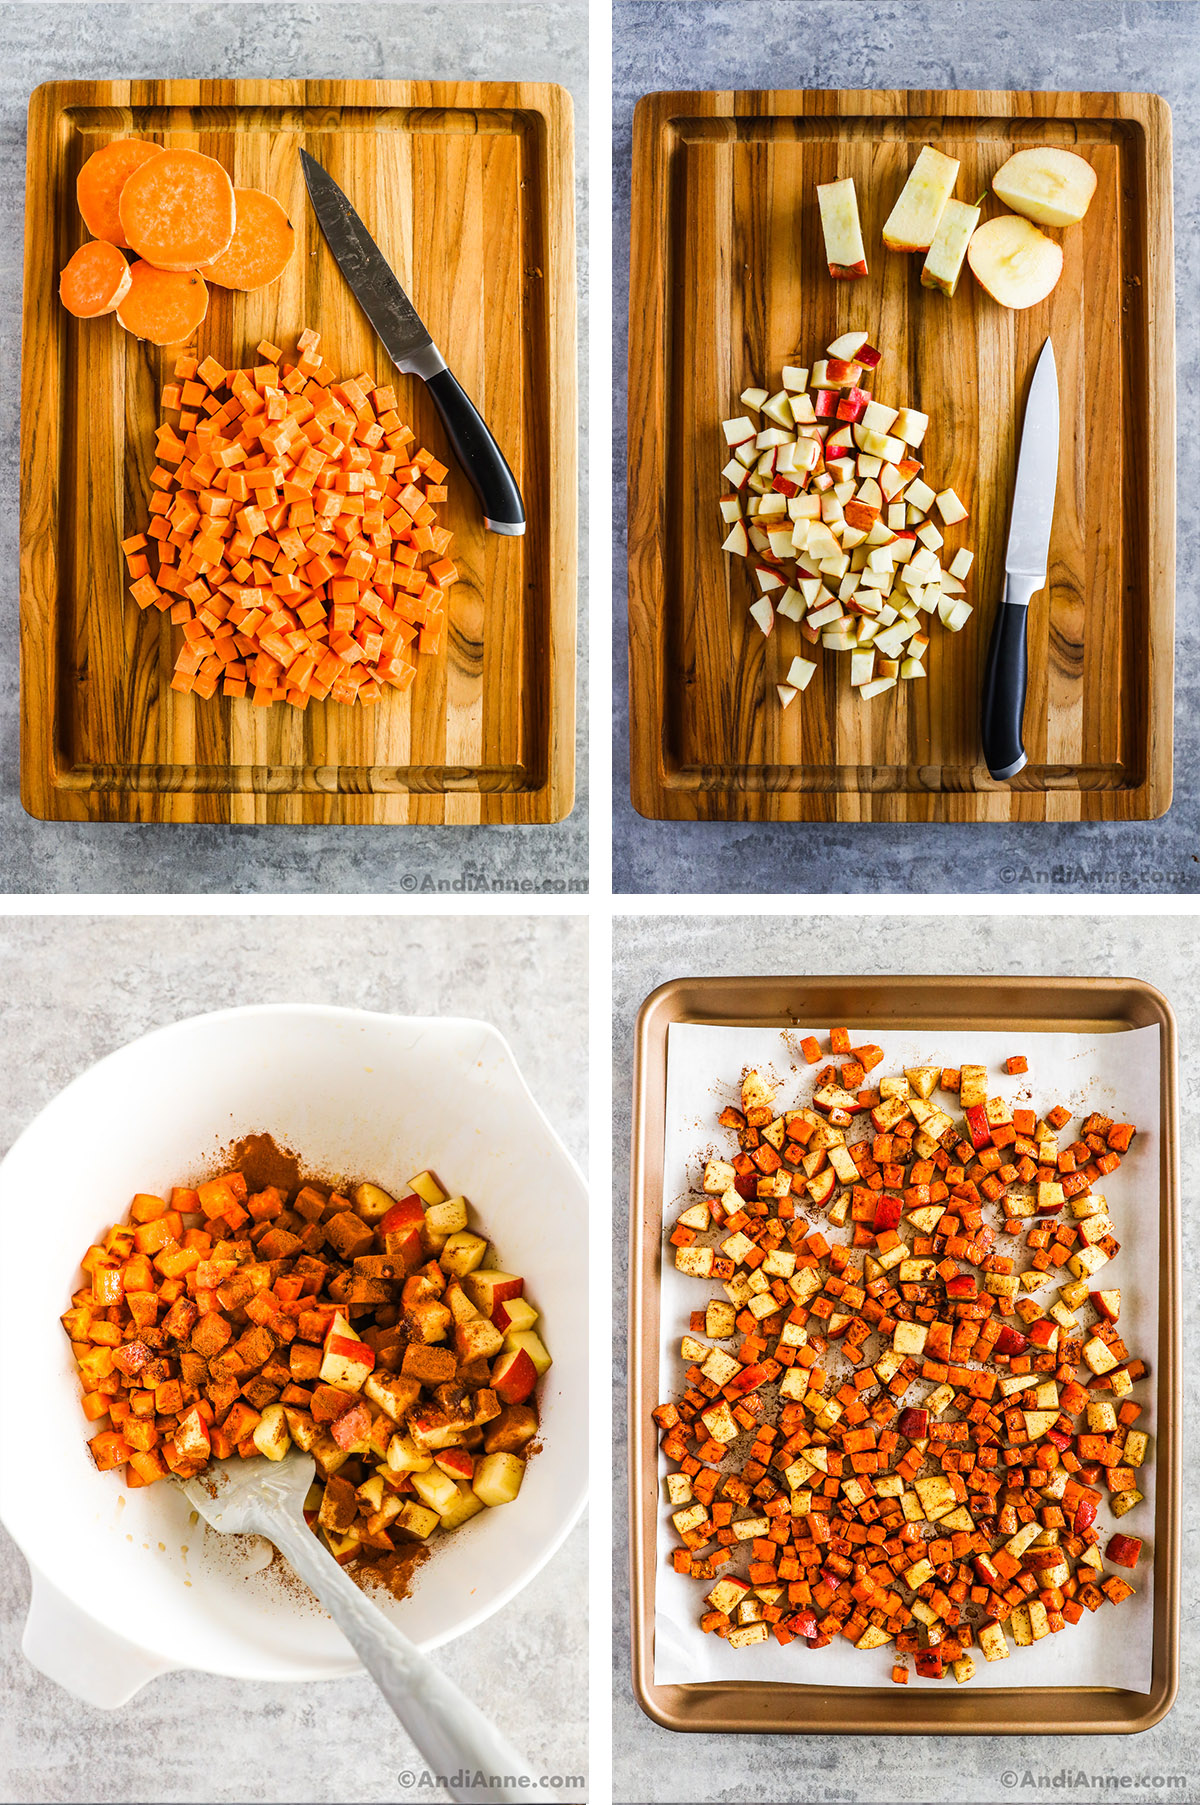 Four images with steps to make recipe. First two are chopped sweet potato and apple on cutting board. Third is bowl of chopped apple and sweet potato with cinnamon on top. Last is roasted sweet potato and apple on baking sheet.